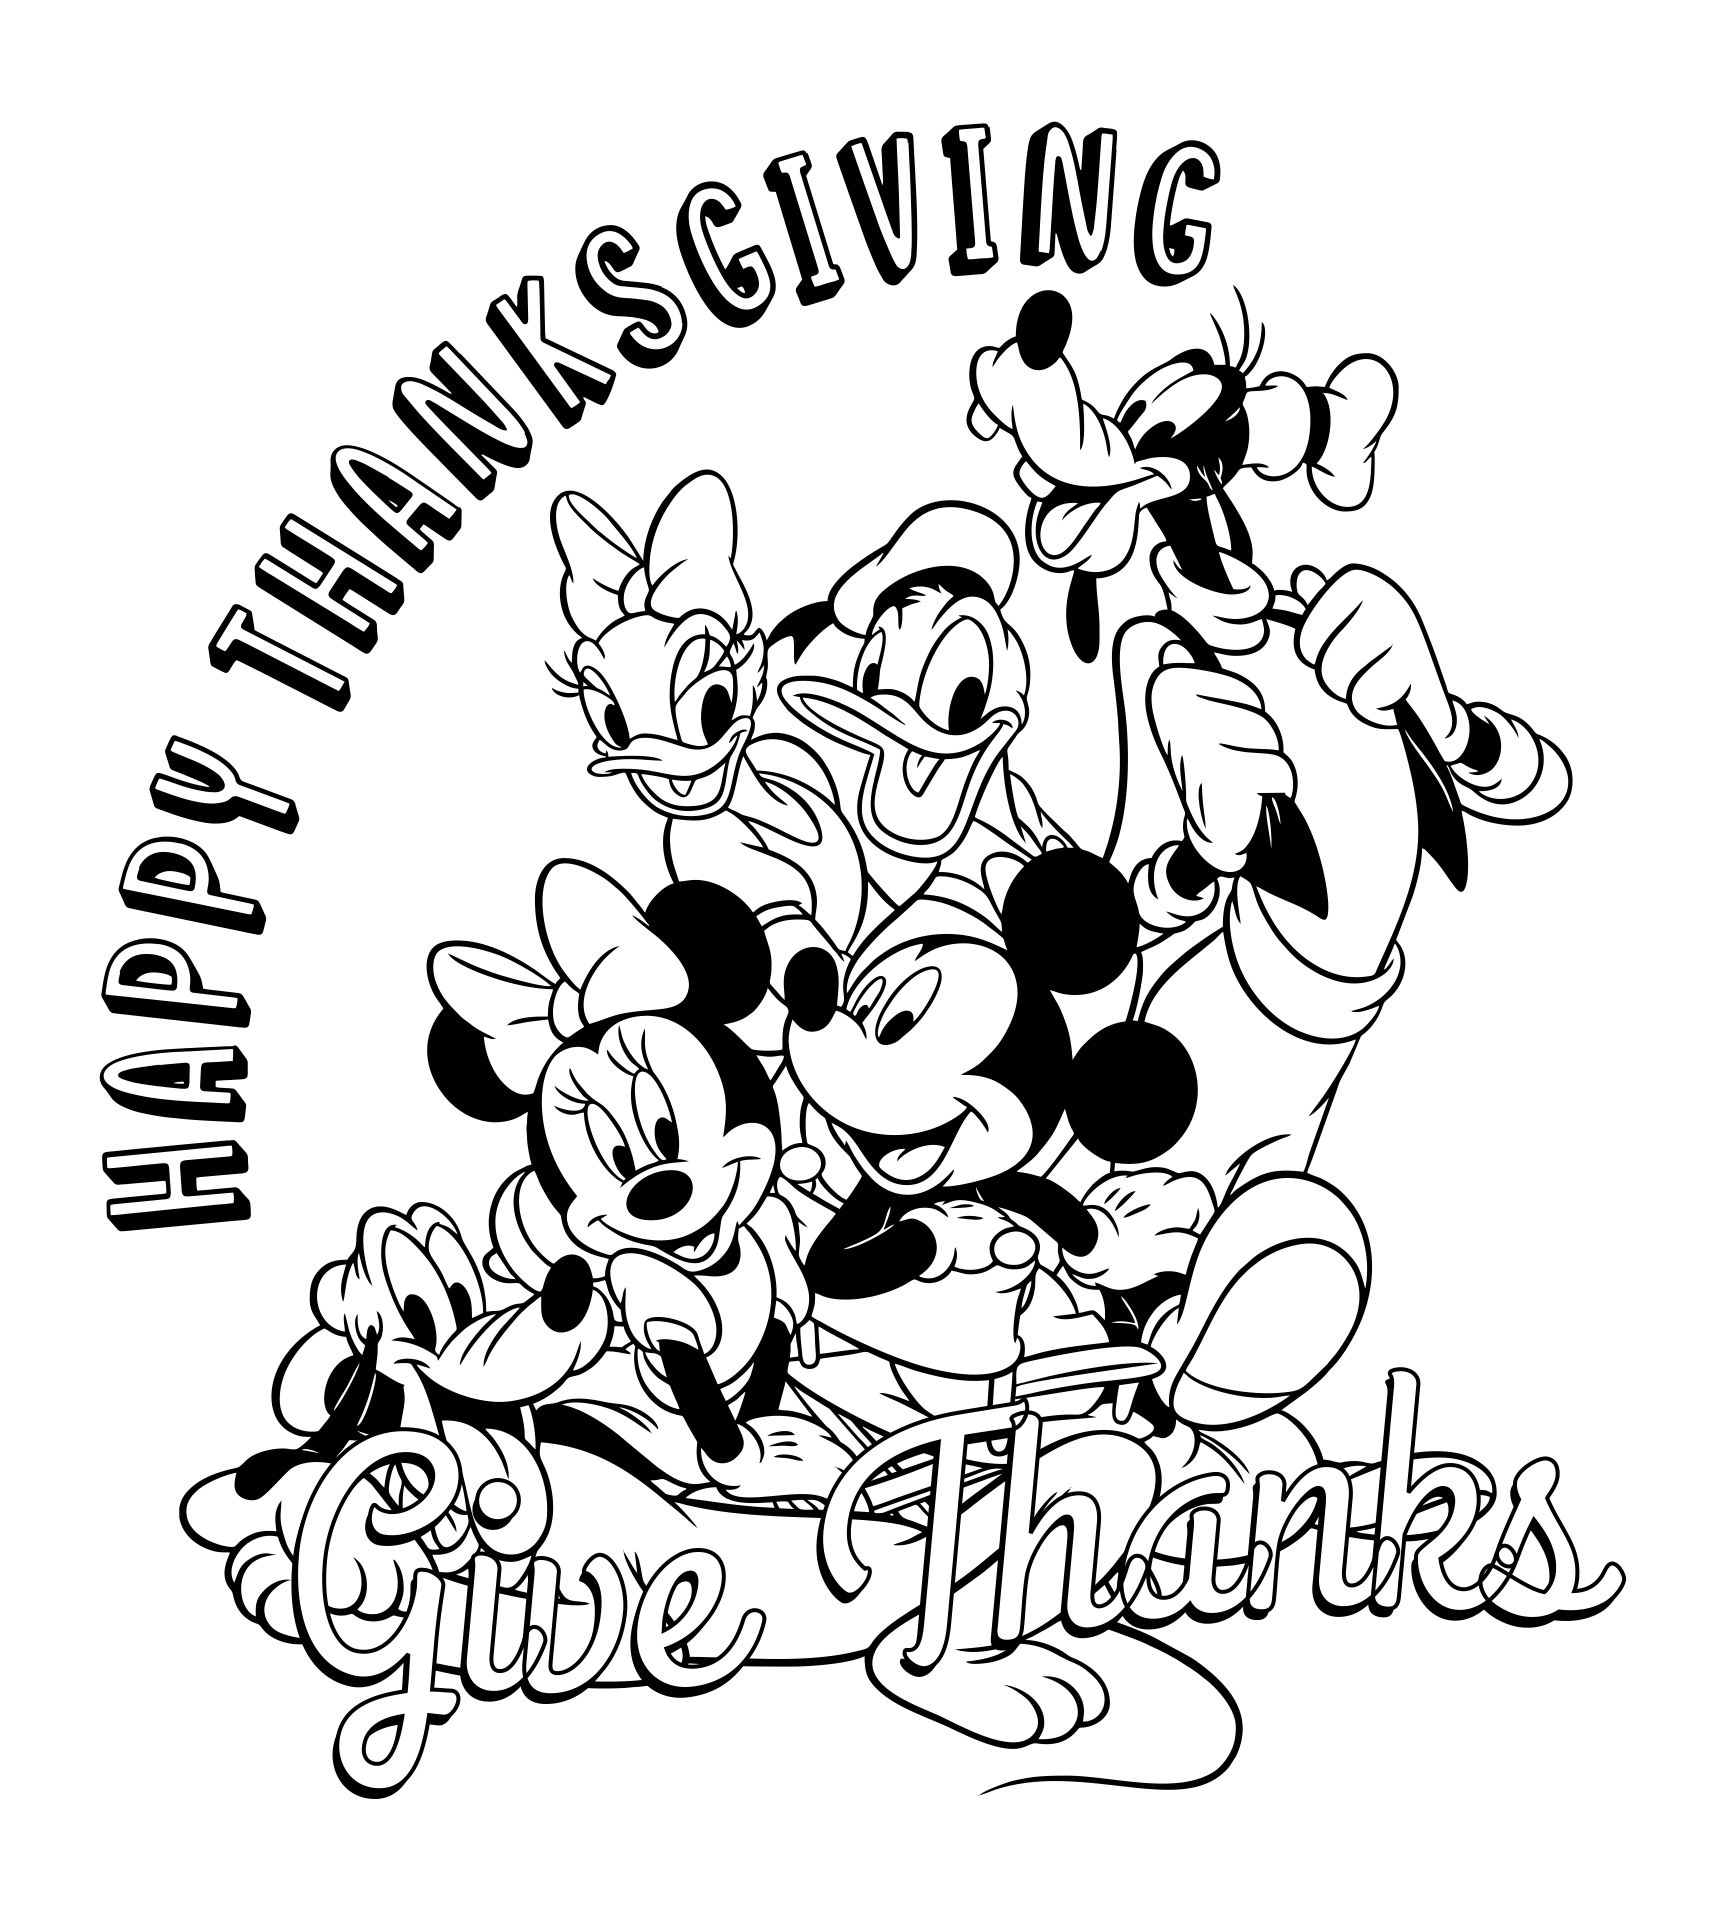 Disney Thanksgiving Coloring Page For Kids